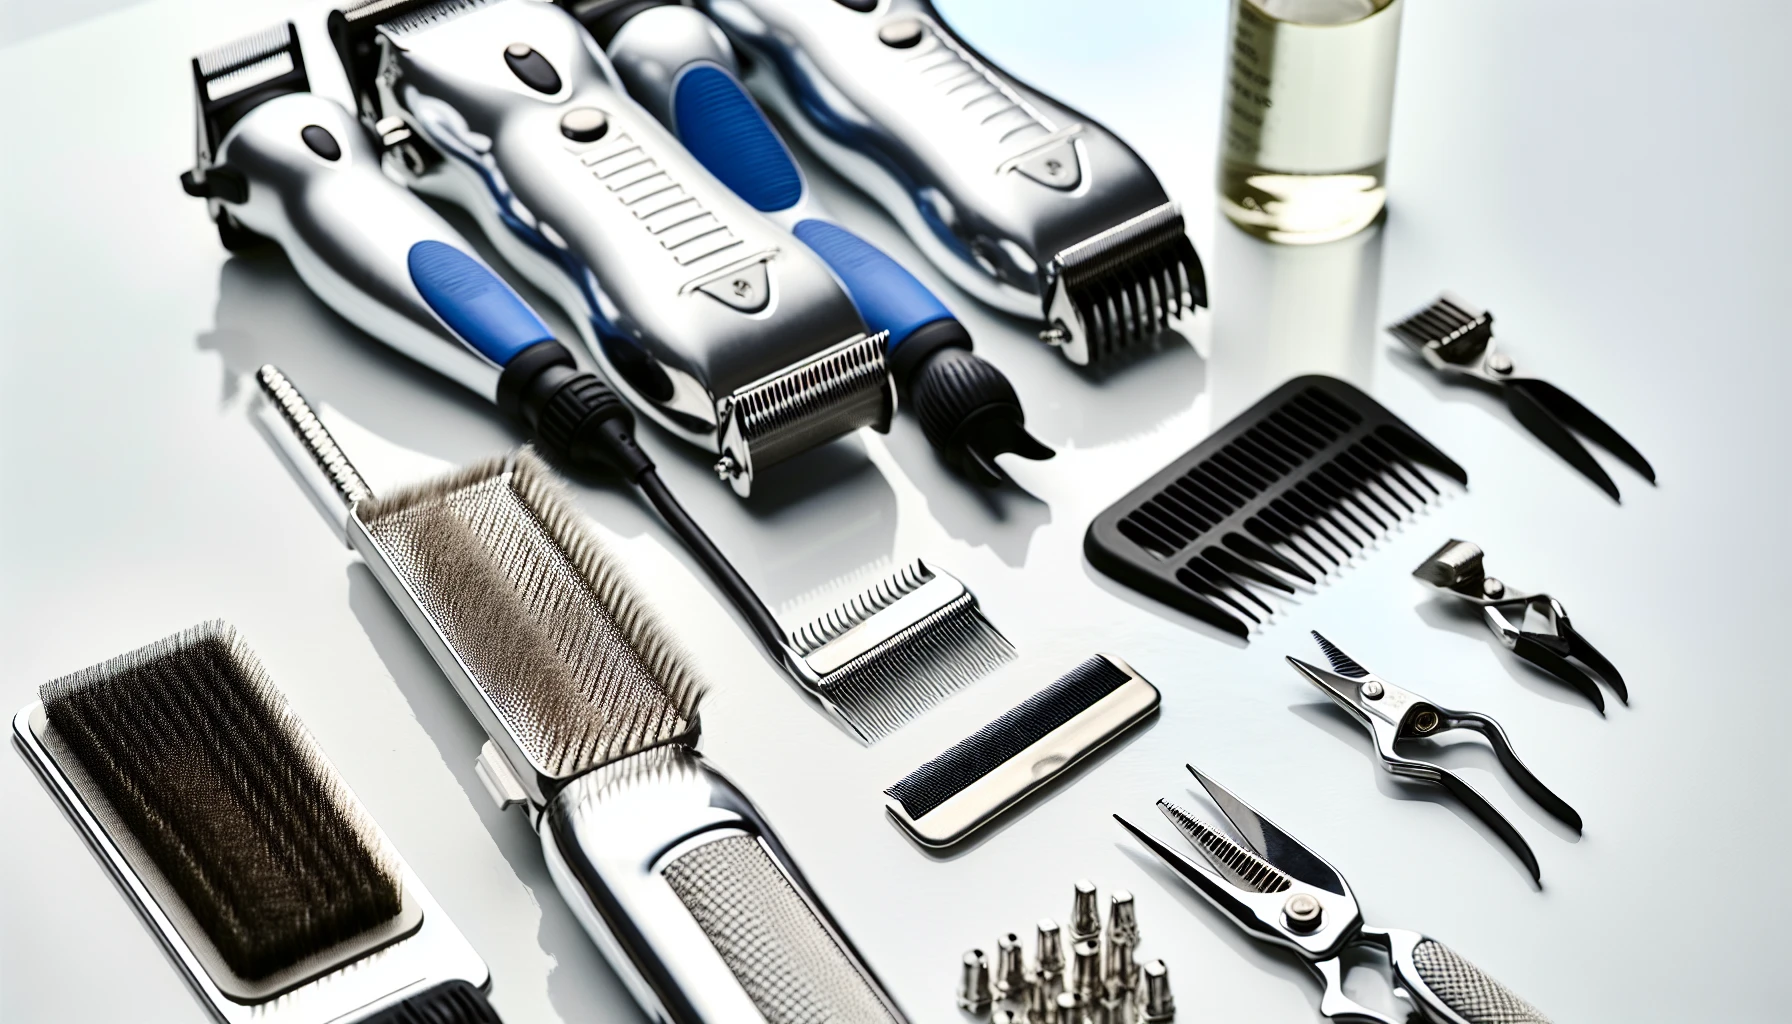 A variety of dog grooming clippers and accessories